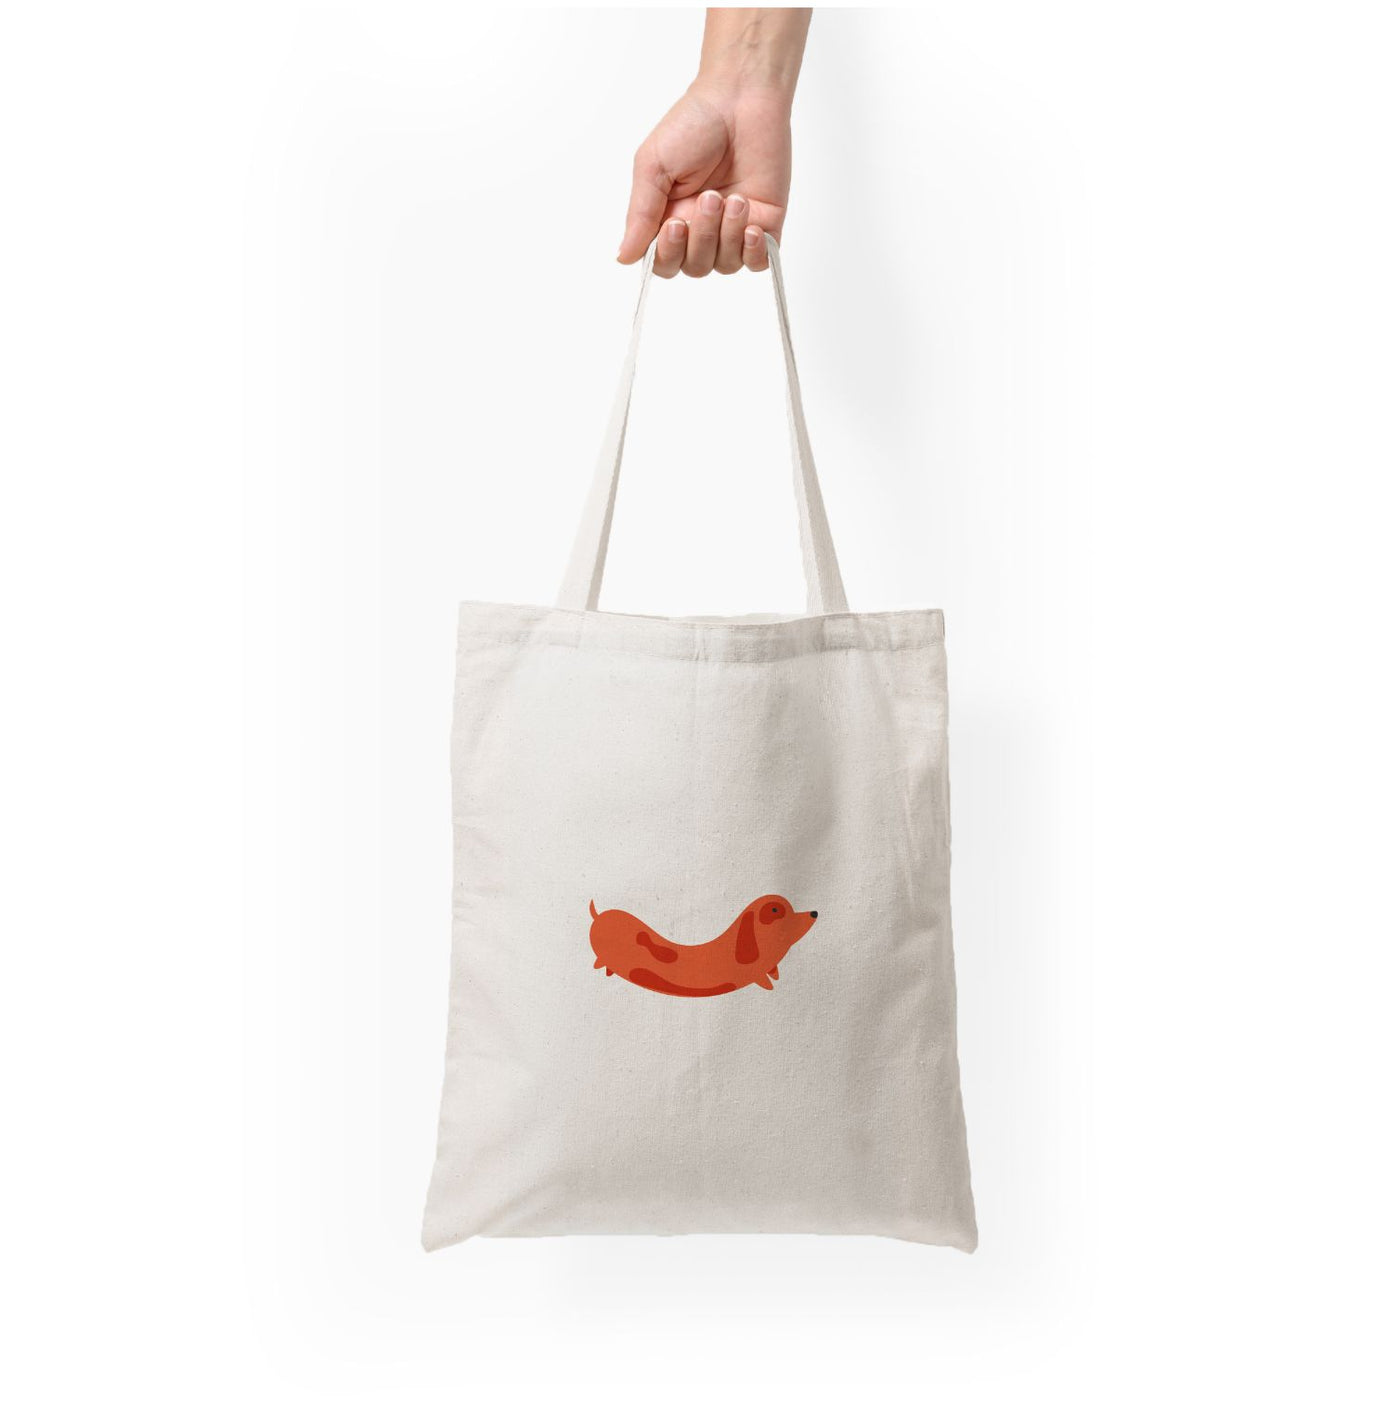 Little sausage - Dachshunds Tote Bag